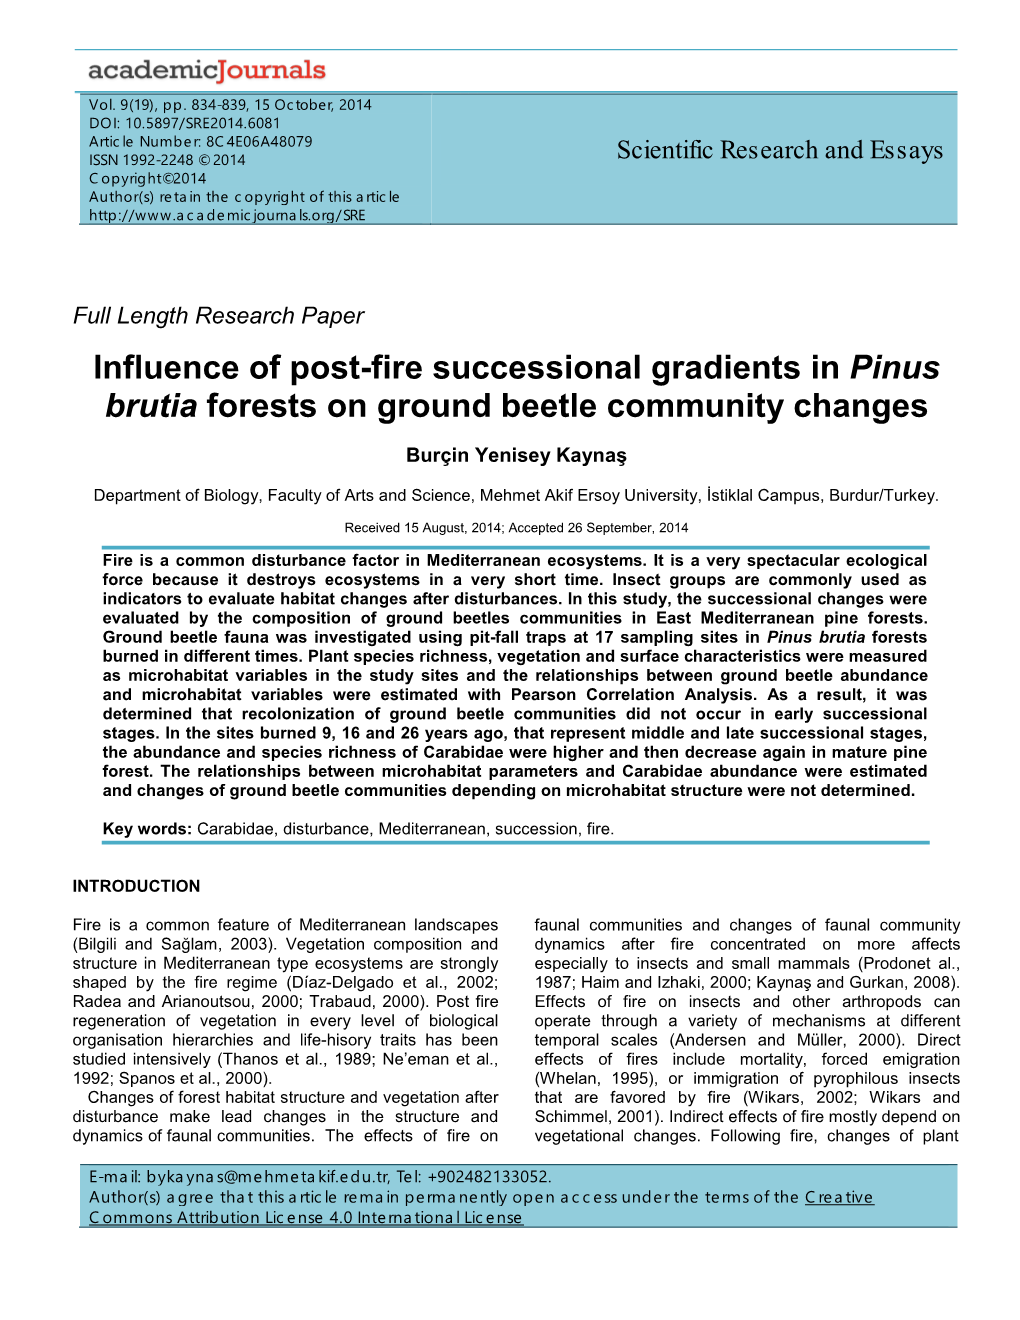 Influence of Post-Fire Successional Gradients in Pinus Brutia Forests on Ground Beetle Community Changes